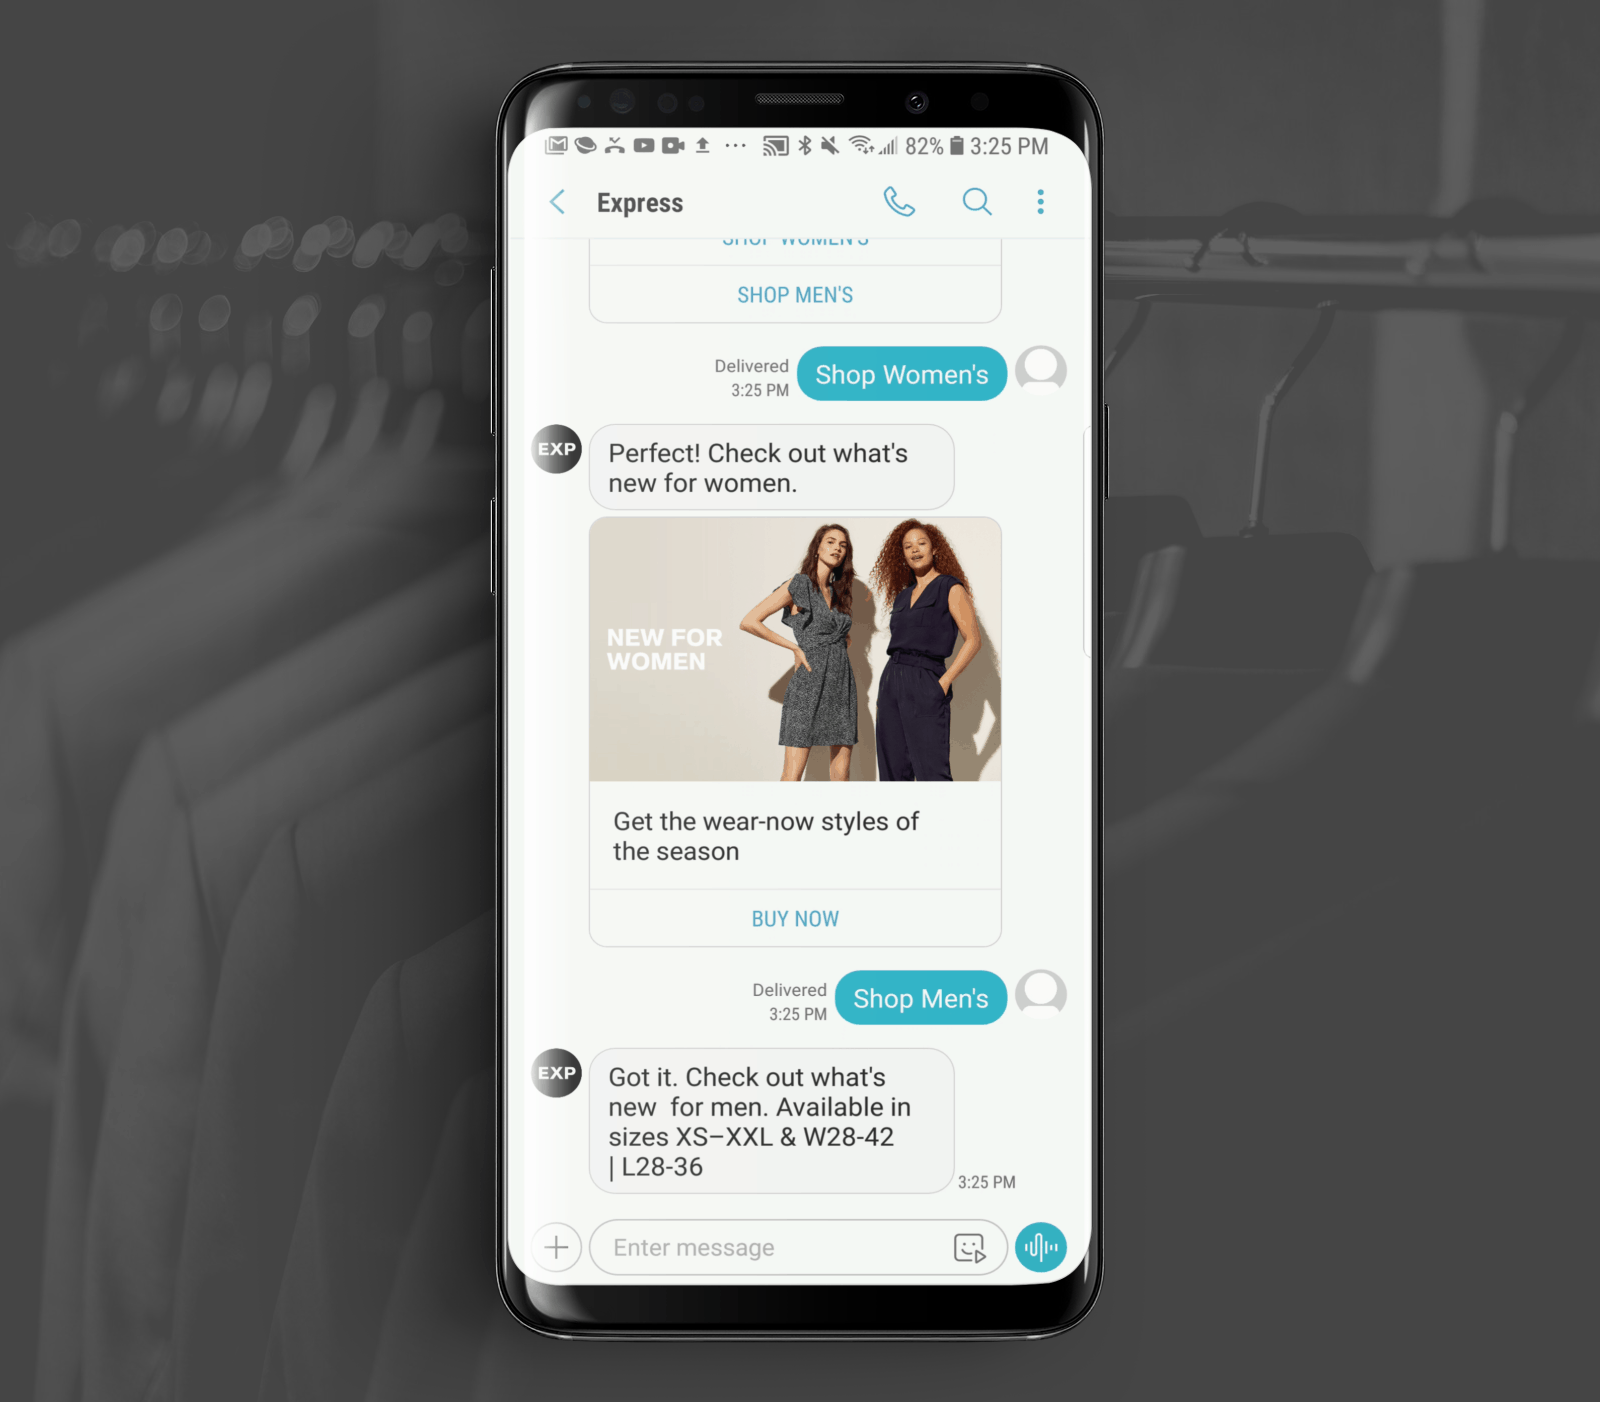 RCS Business Messaging Example from Express Clothing Stores 3